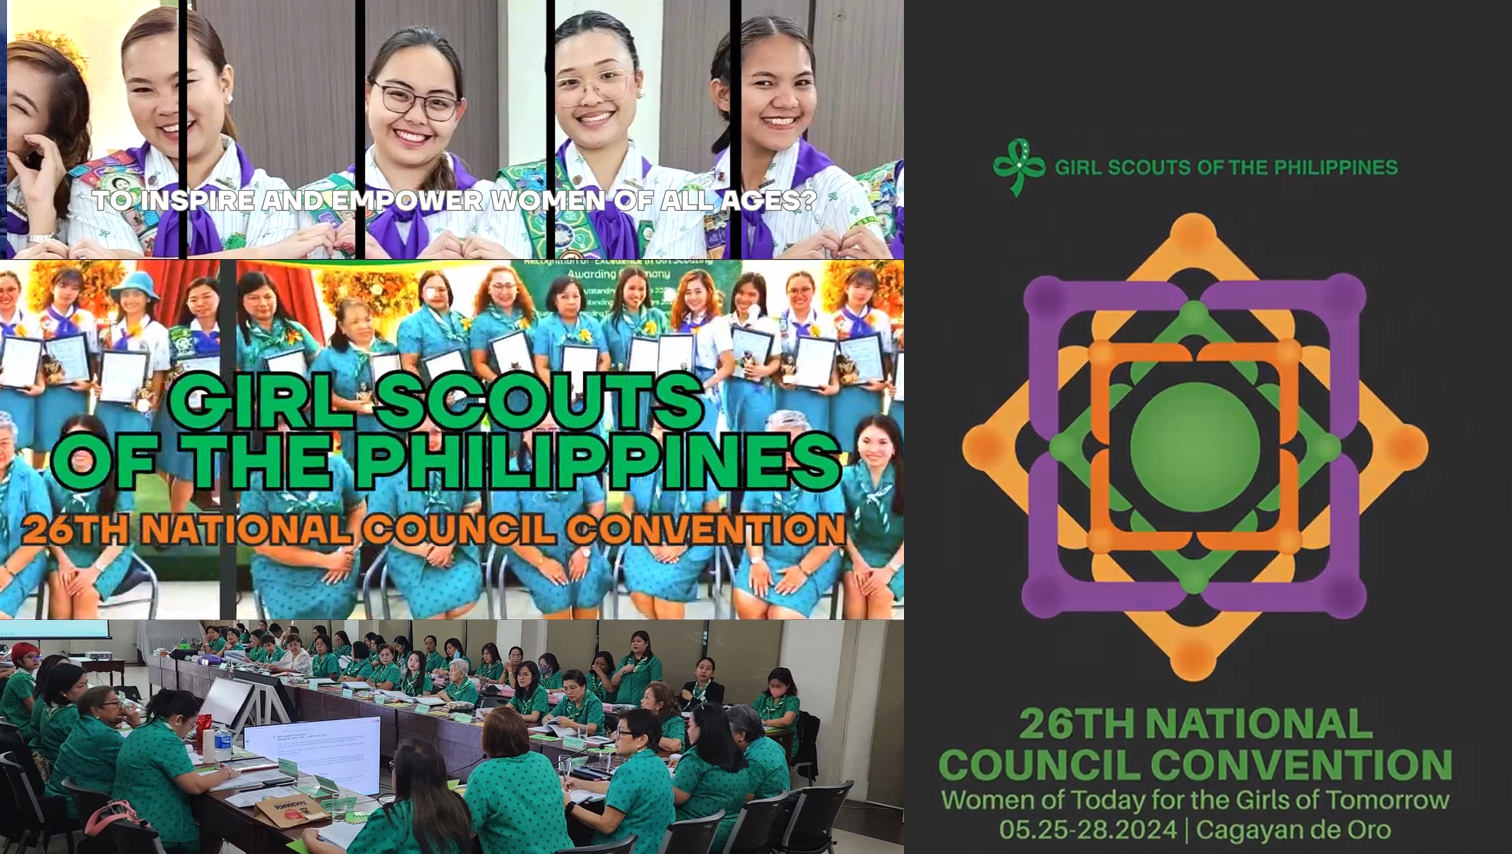 EVENT WATCH: Cagayan de Oro to host 26th National Council Convention of the Girl Scouts of the Philippines